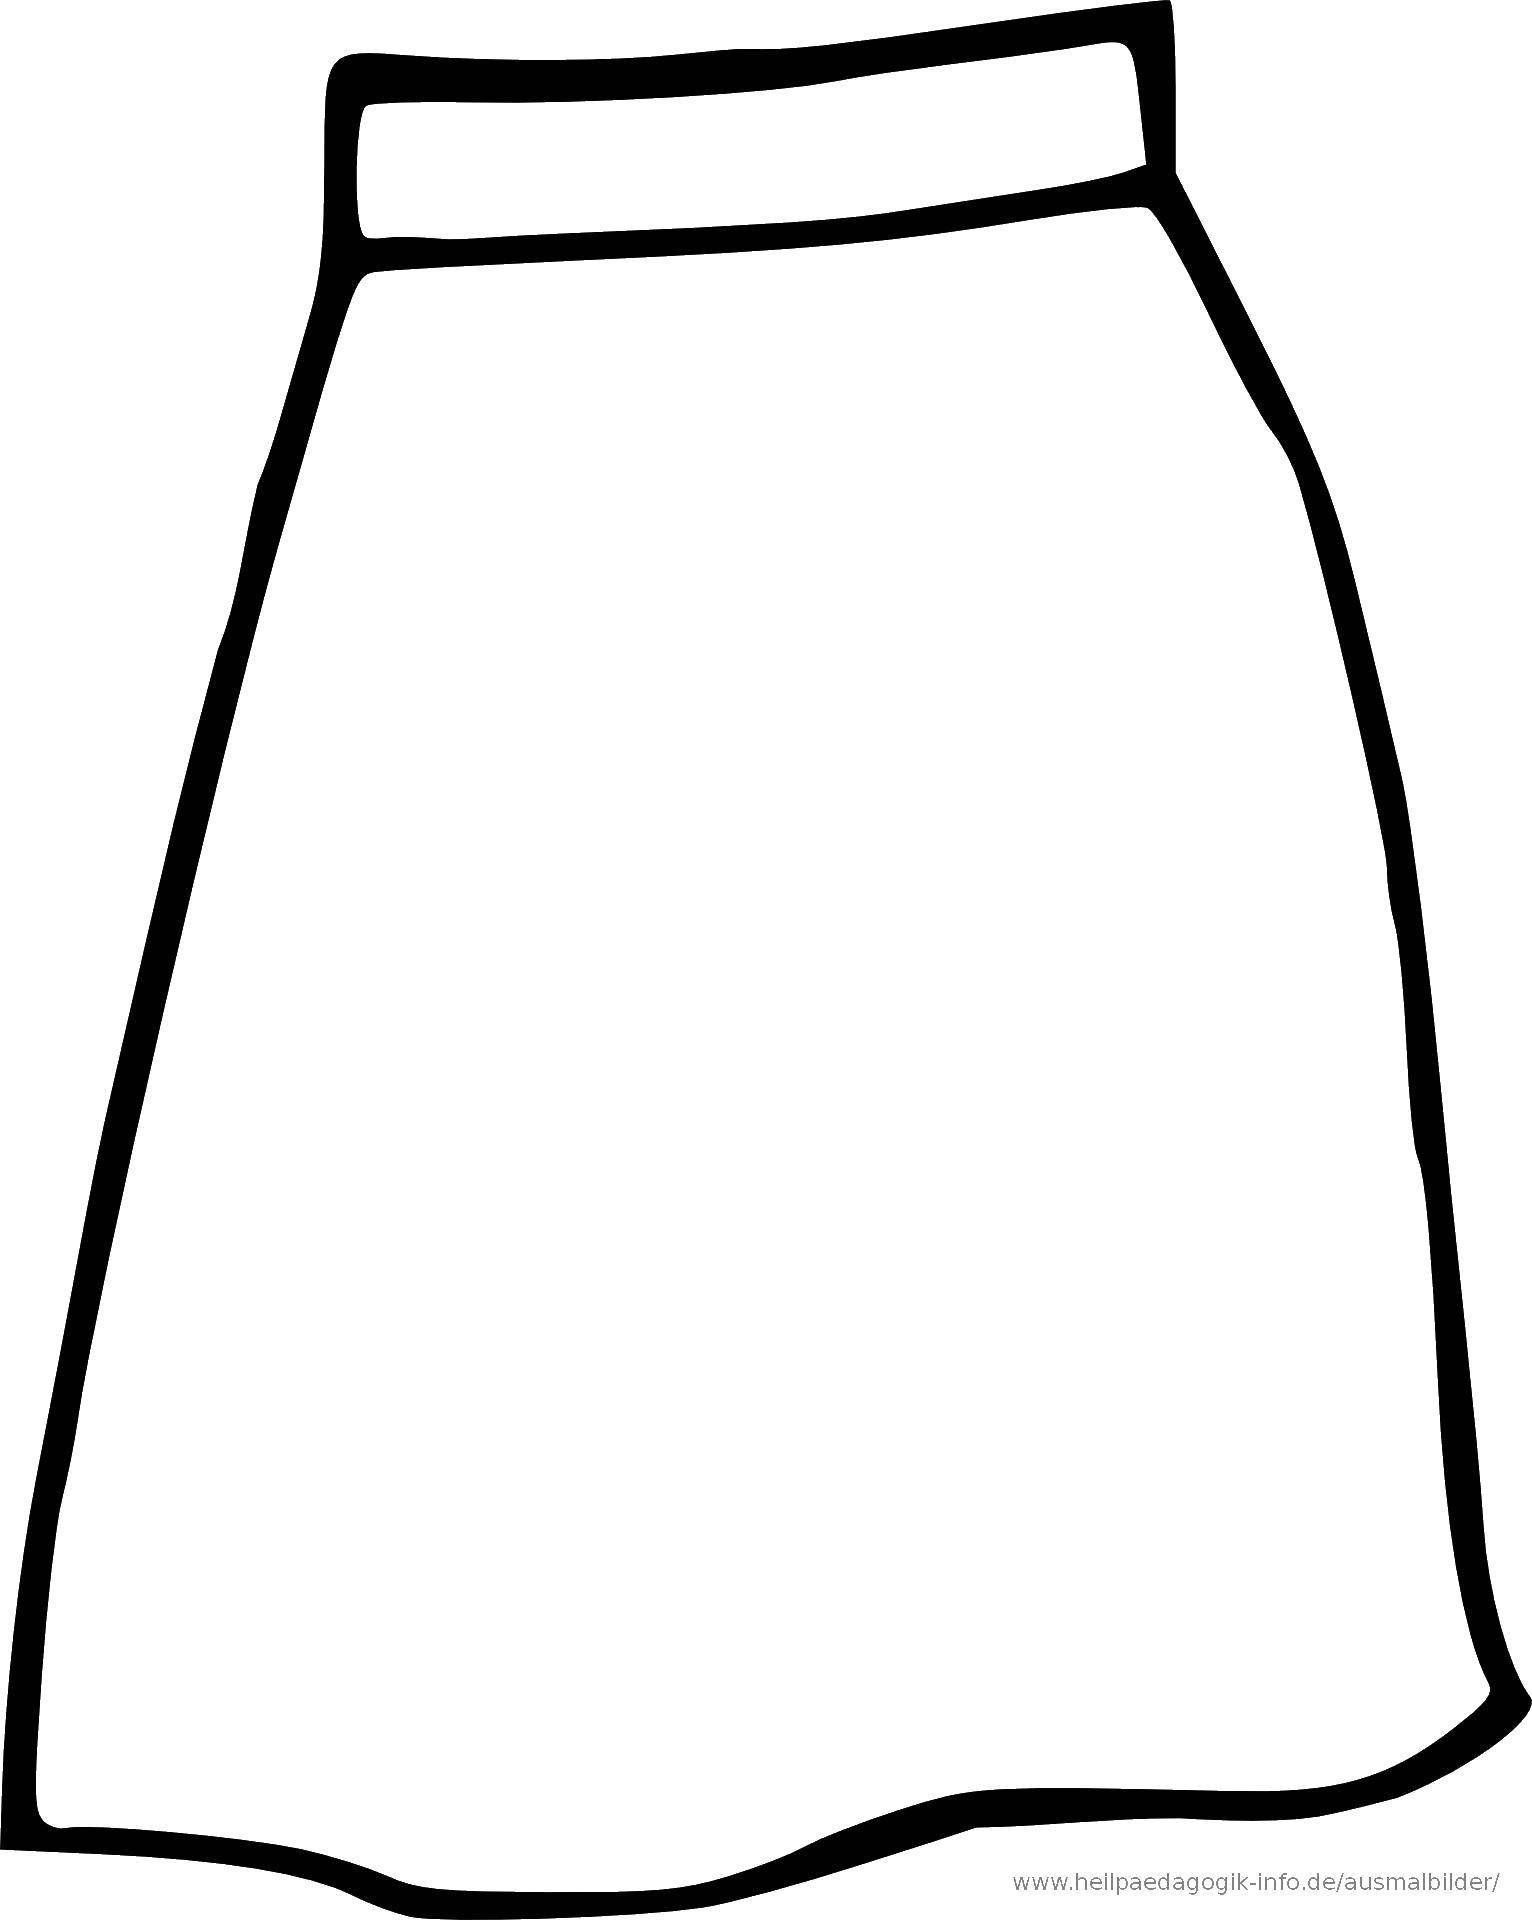 Coloring Straight skirt. Category skirt. Tags:  clothing, skirt.